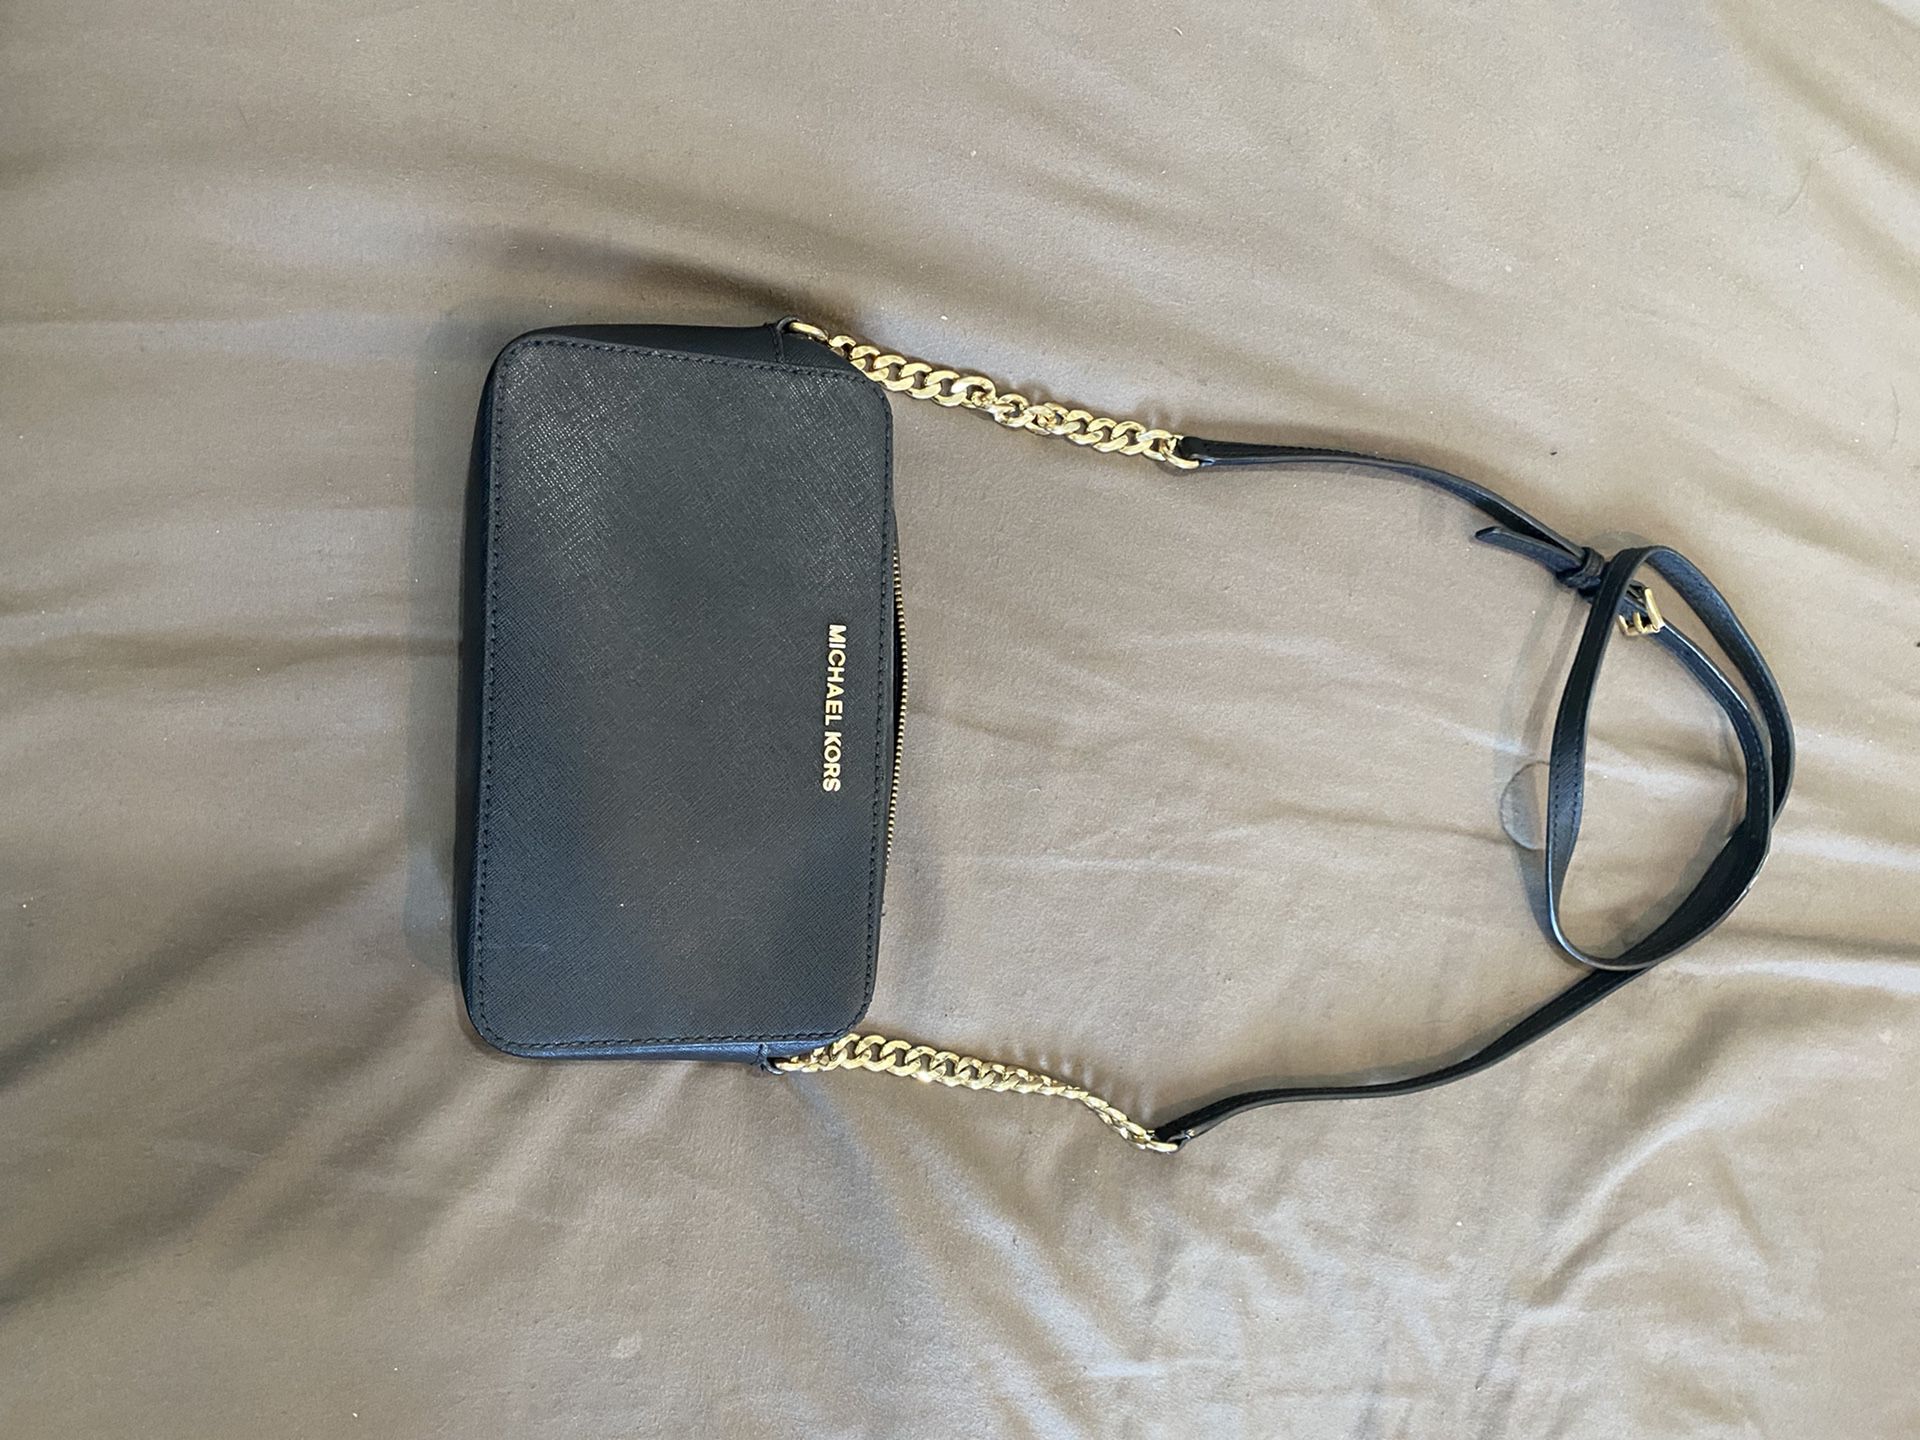 New Authentic Michael Kors Hendrix Extra Small Crossbody Bag for Sale in  Edmonds, WA - OfferUp